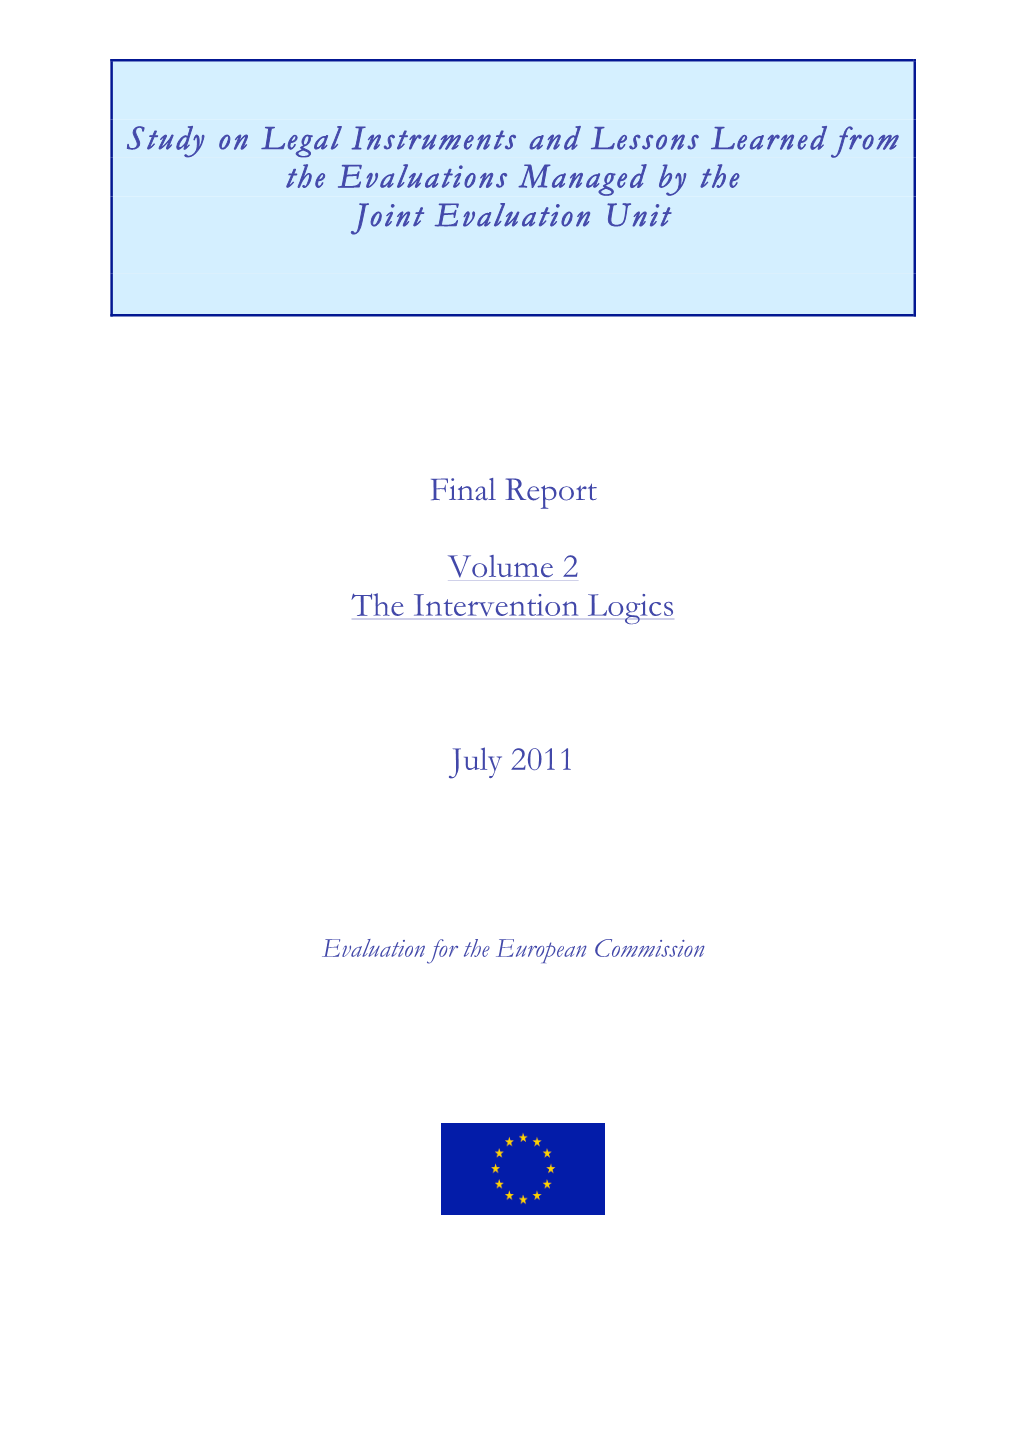 Study on Legal Instruments and Lessons Learned from the Evaluations Managed by the Joint Evaluation Unit